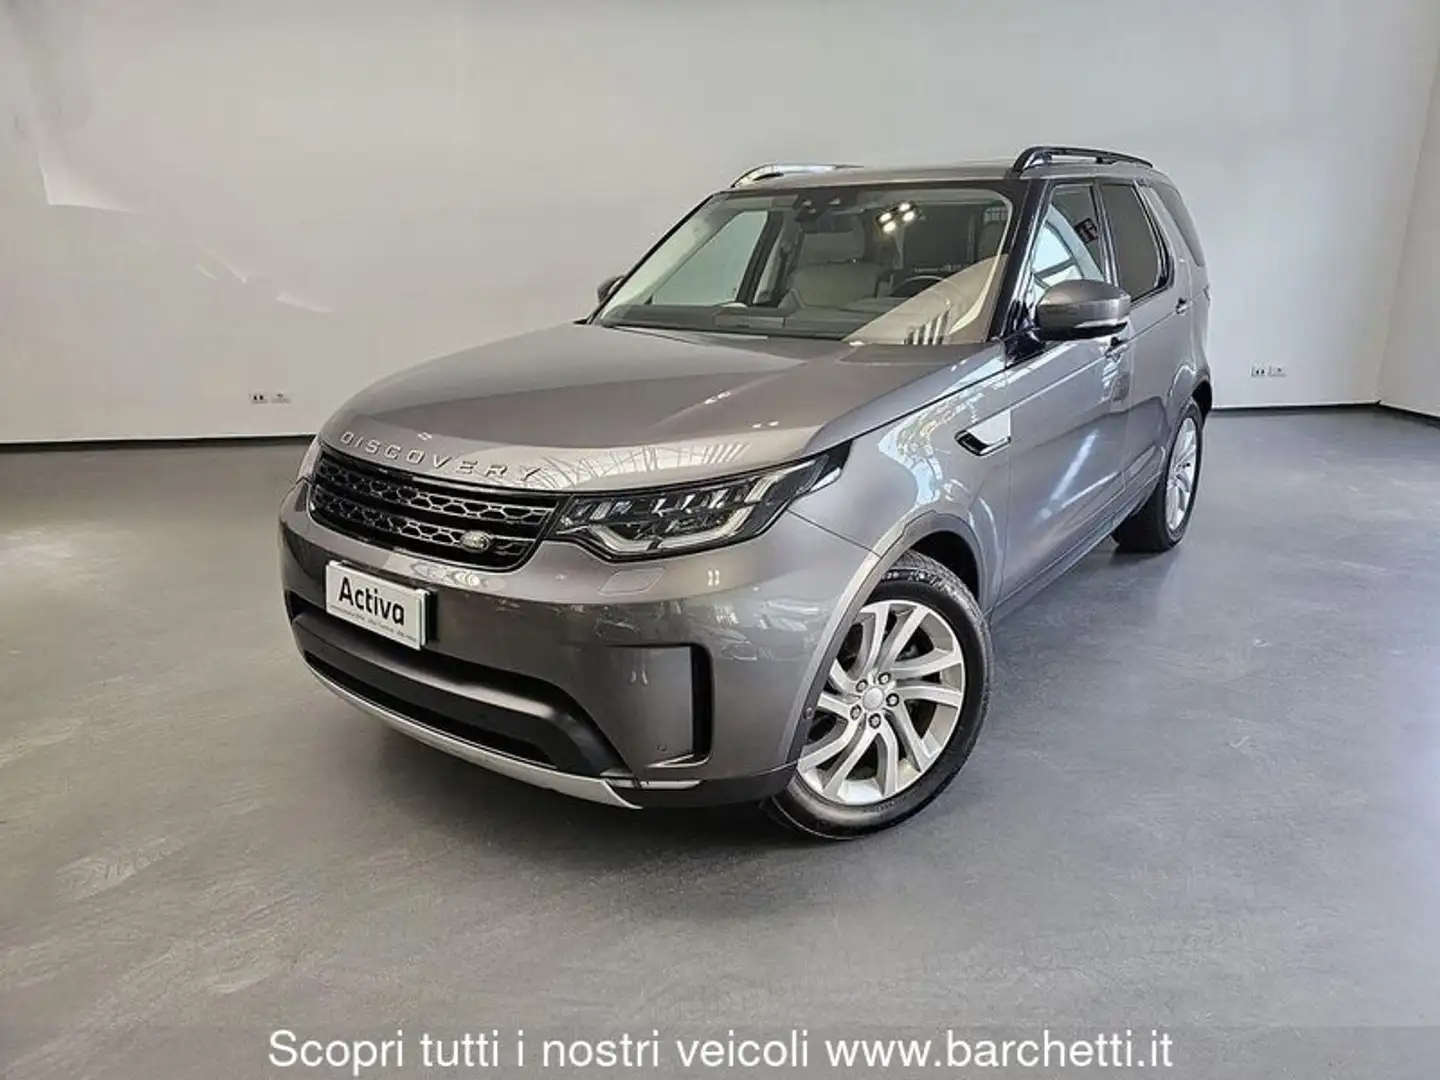 Land Rover Discovery 2.0 td4 HSE Luxury 180cv 5p.ti auto my18 - 1